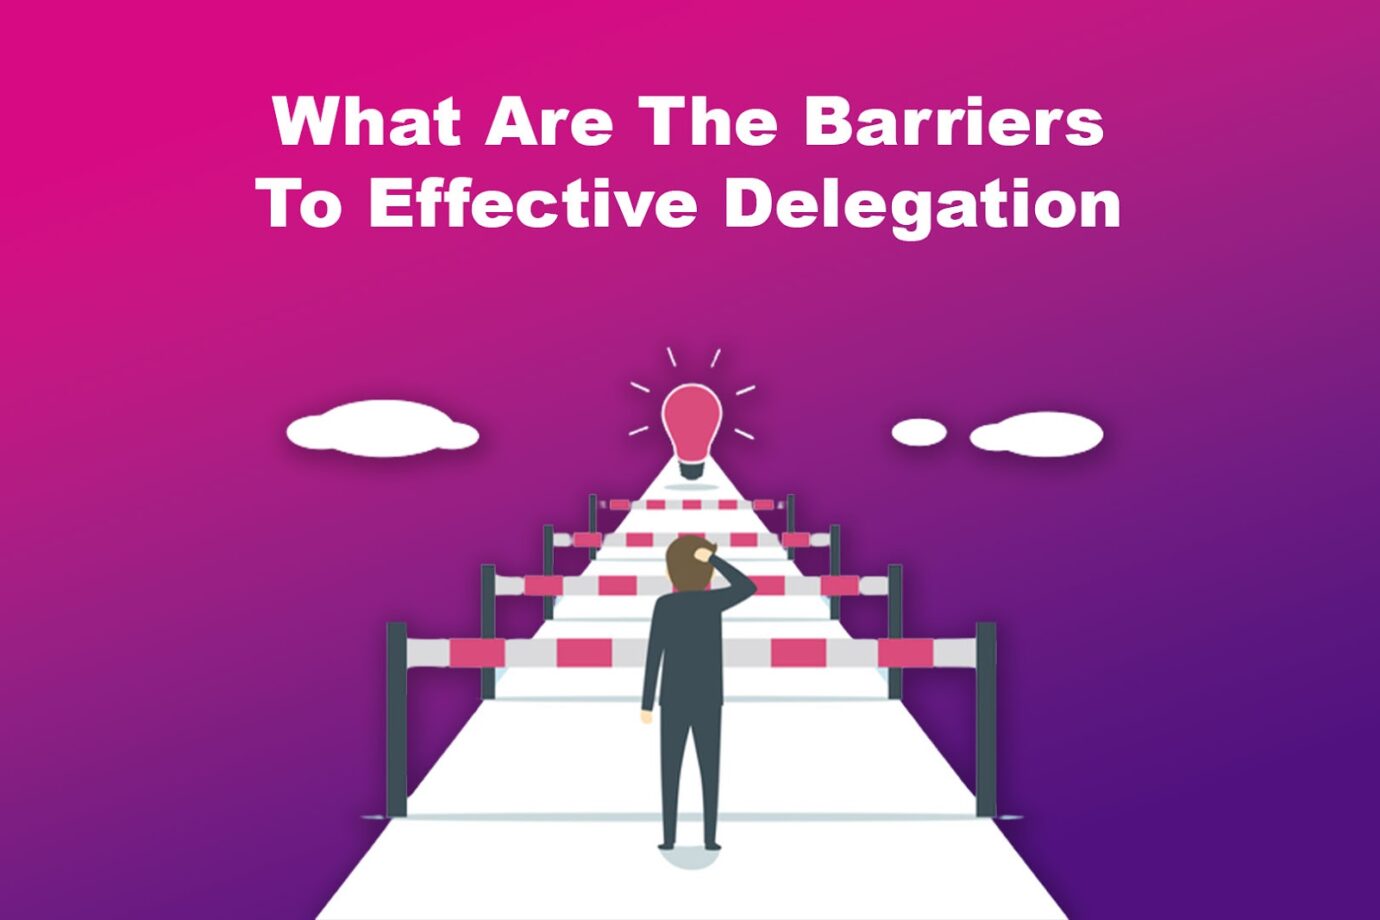 What Are The Barriers To Effective Delegation